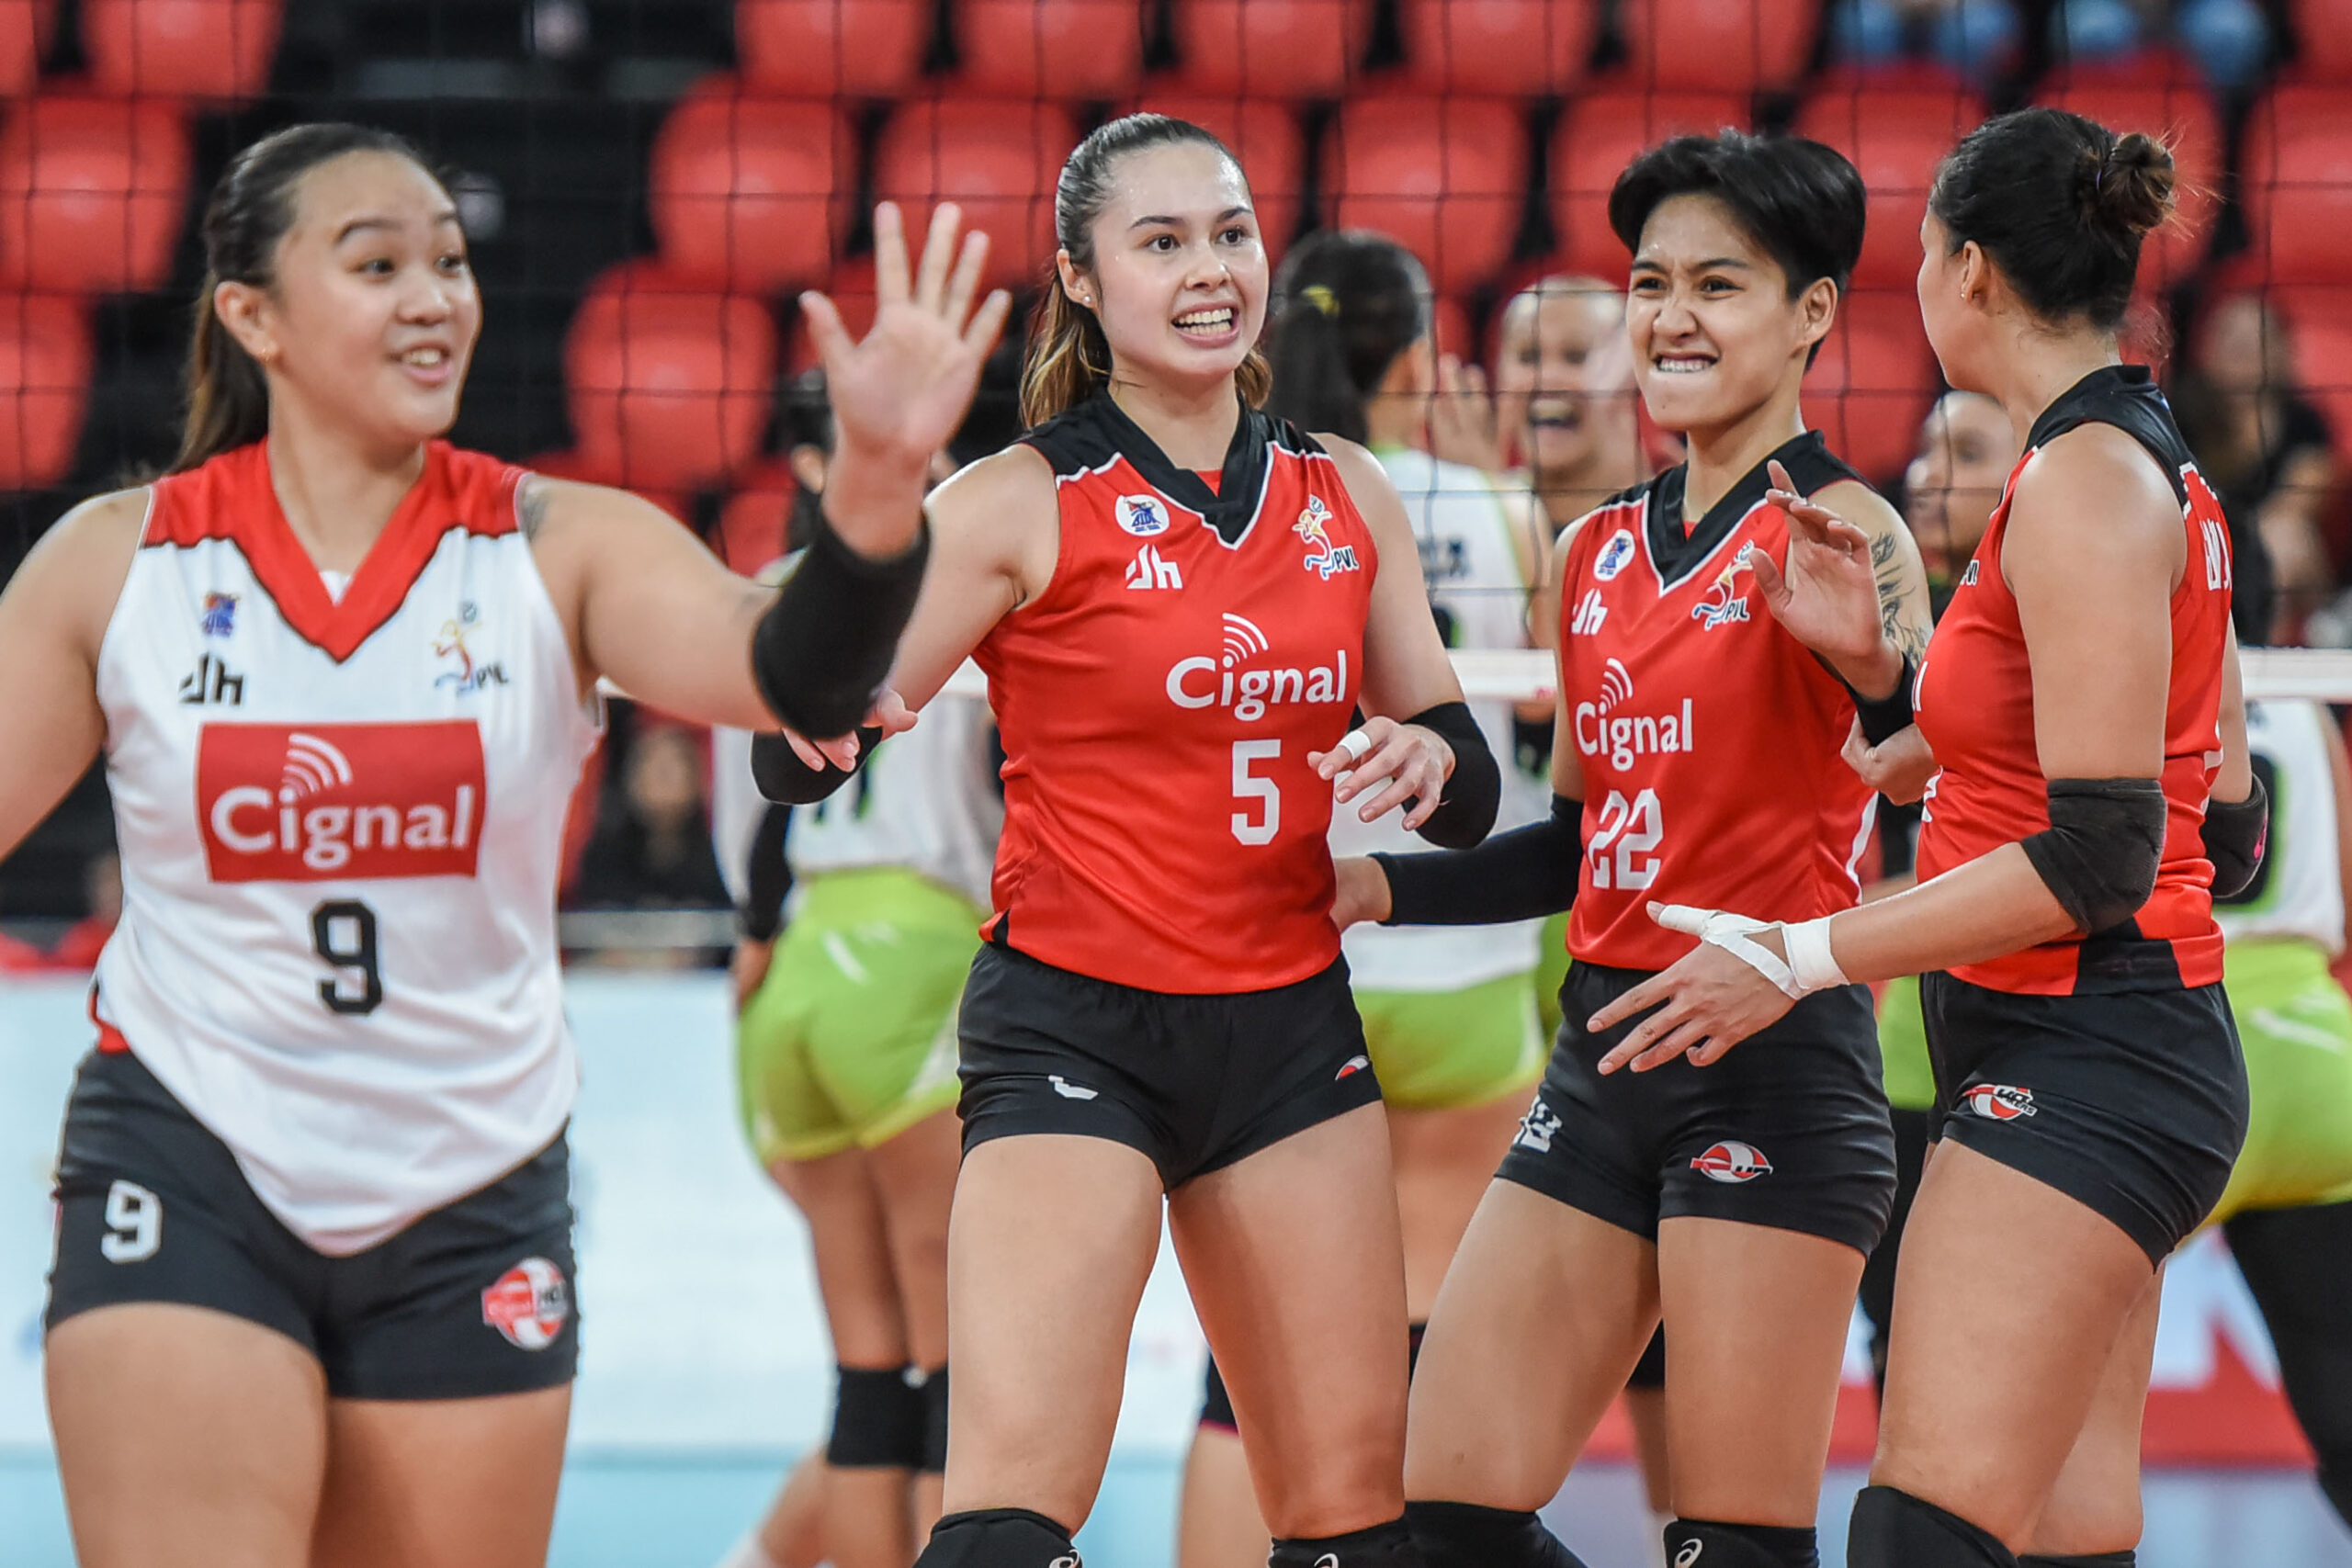 PVL-AFC-Cignal-vs.-Nxled-Vanie-Gandler-1026-scaled Gonzaga urges Cignal to shift to higher gear in drive to semis News PVL Volleyball  - philippine sports news